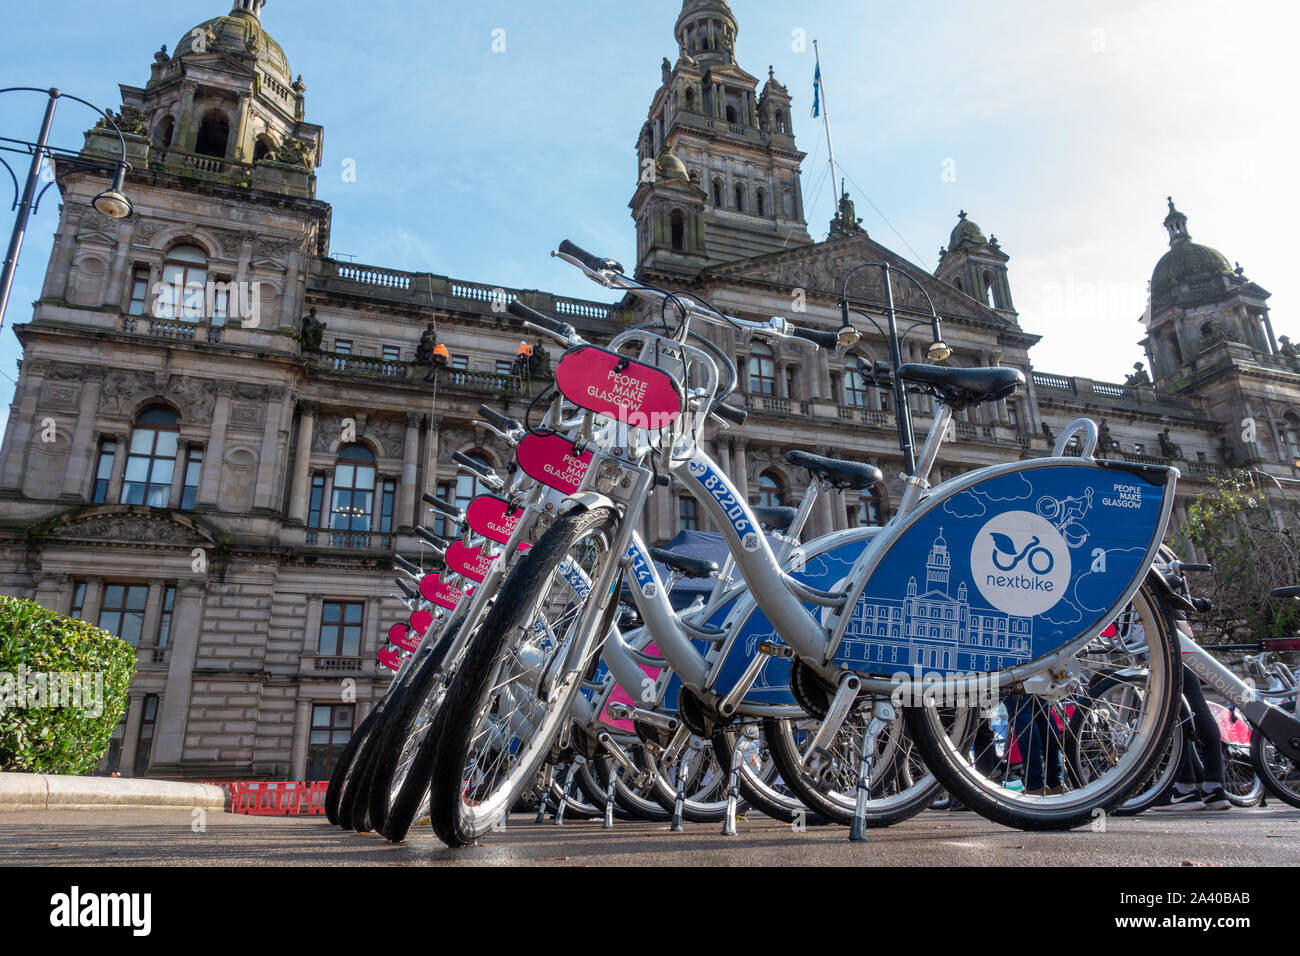 Bikes for hire lined up in front of the City Chambers in George Square Glasgow as part of the promotion of e-bikes. Stock Photo